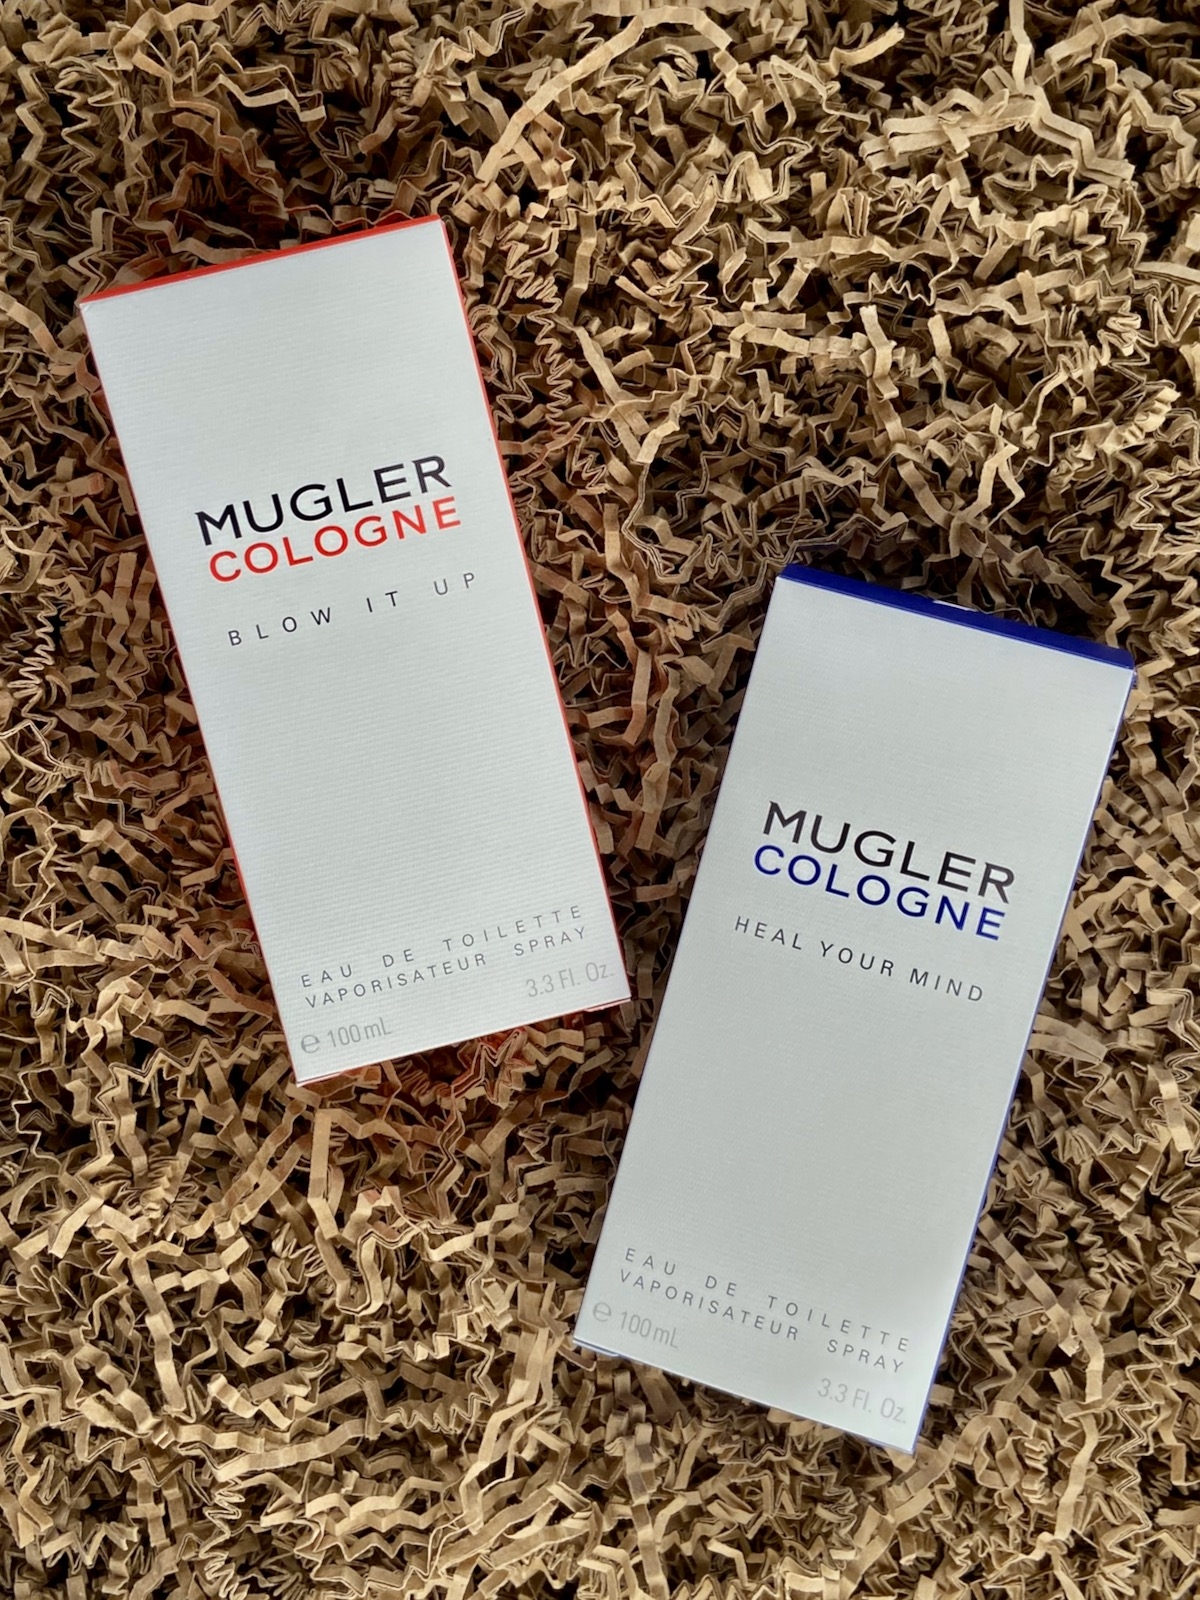 Mugler Cologne Blow it up Heal your mind